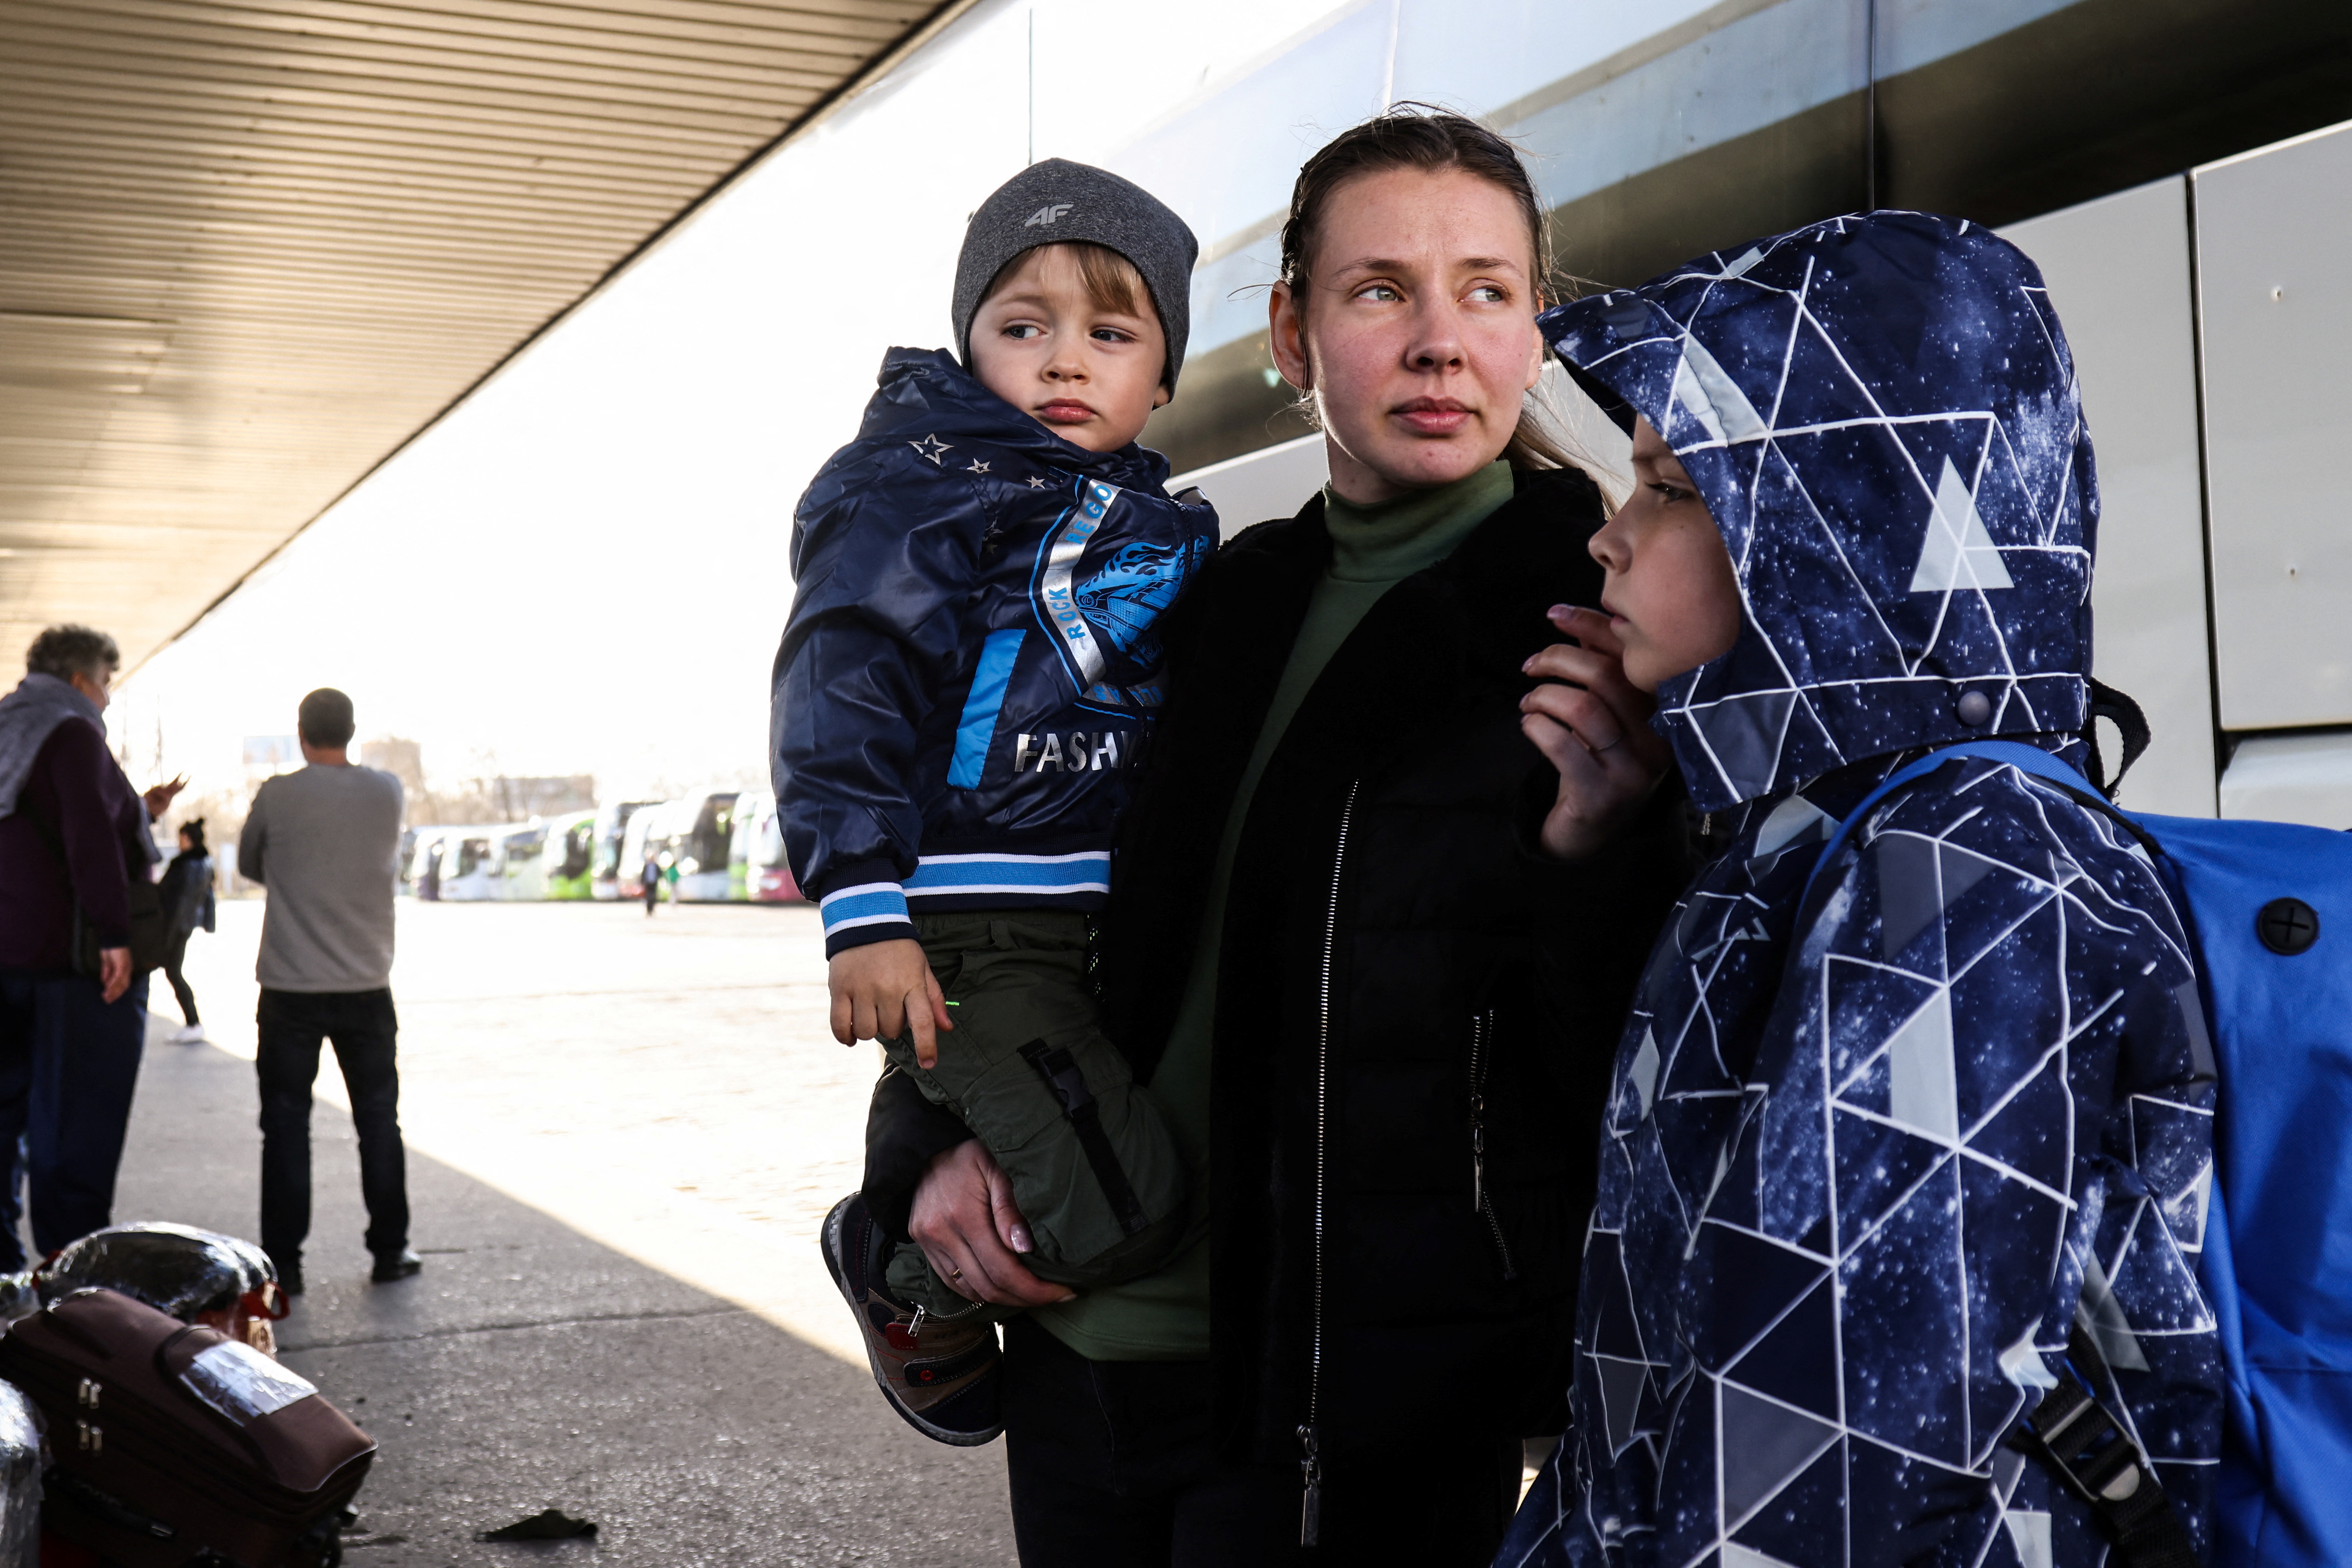 A month into war, some Ukrainian refugees in Poland decide to go back home